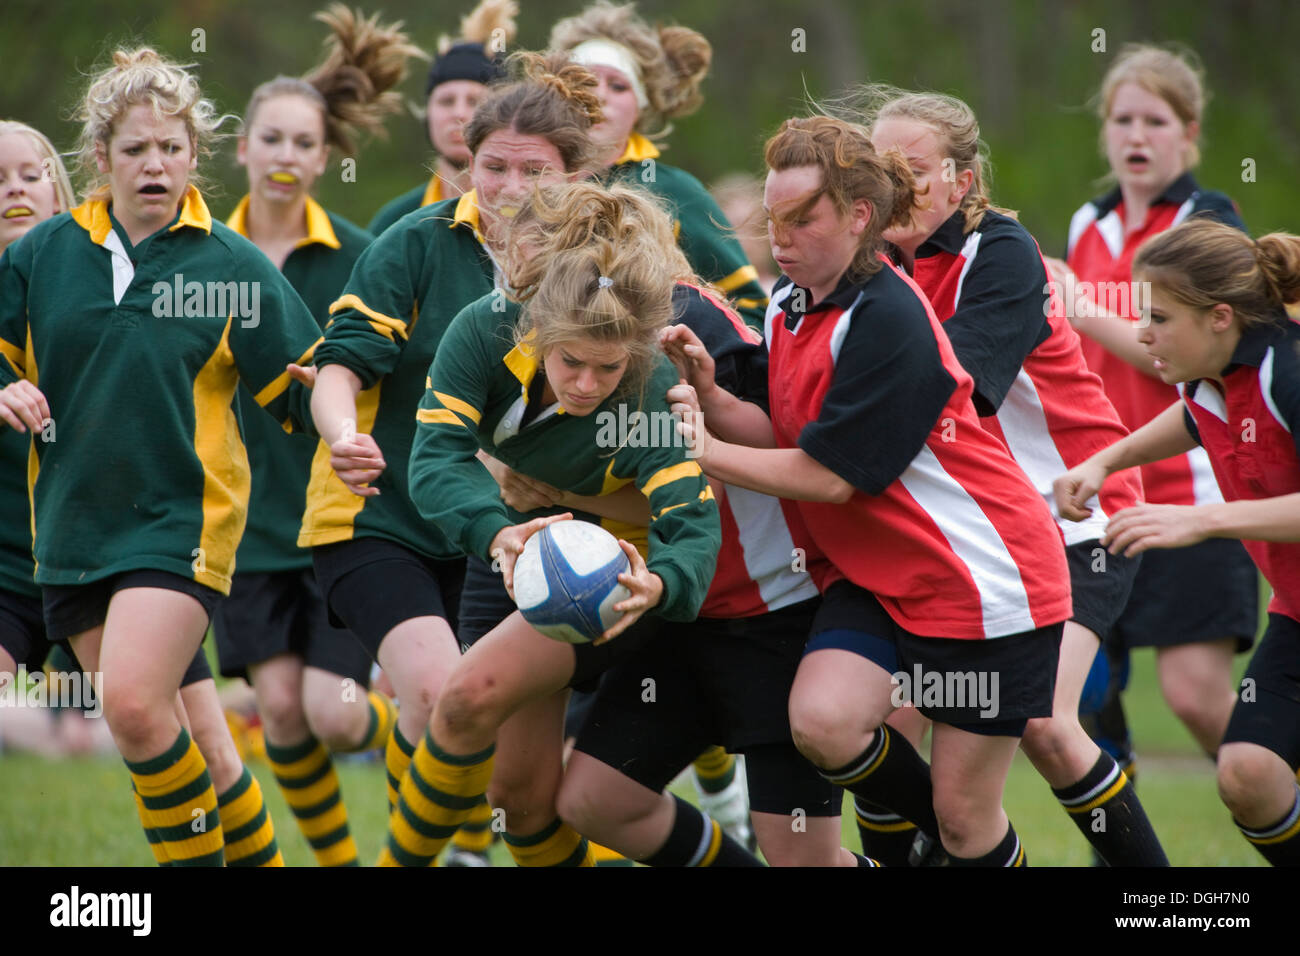 girl catching ball in rugby game Stock Photo